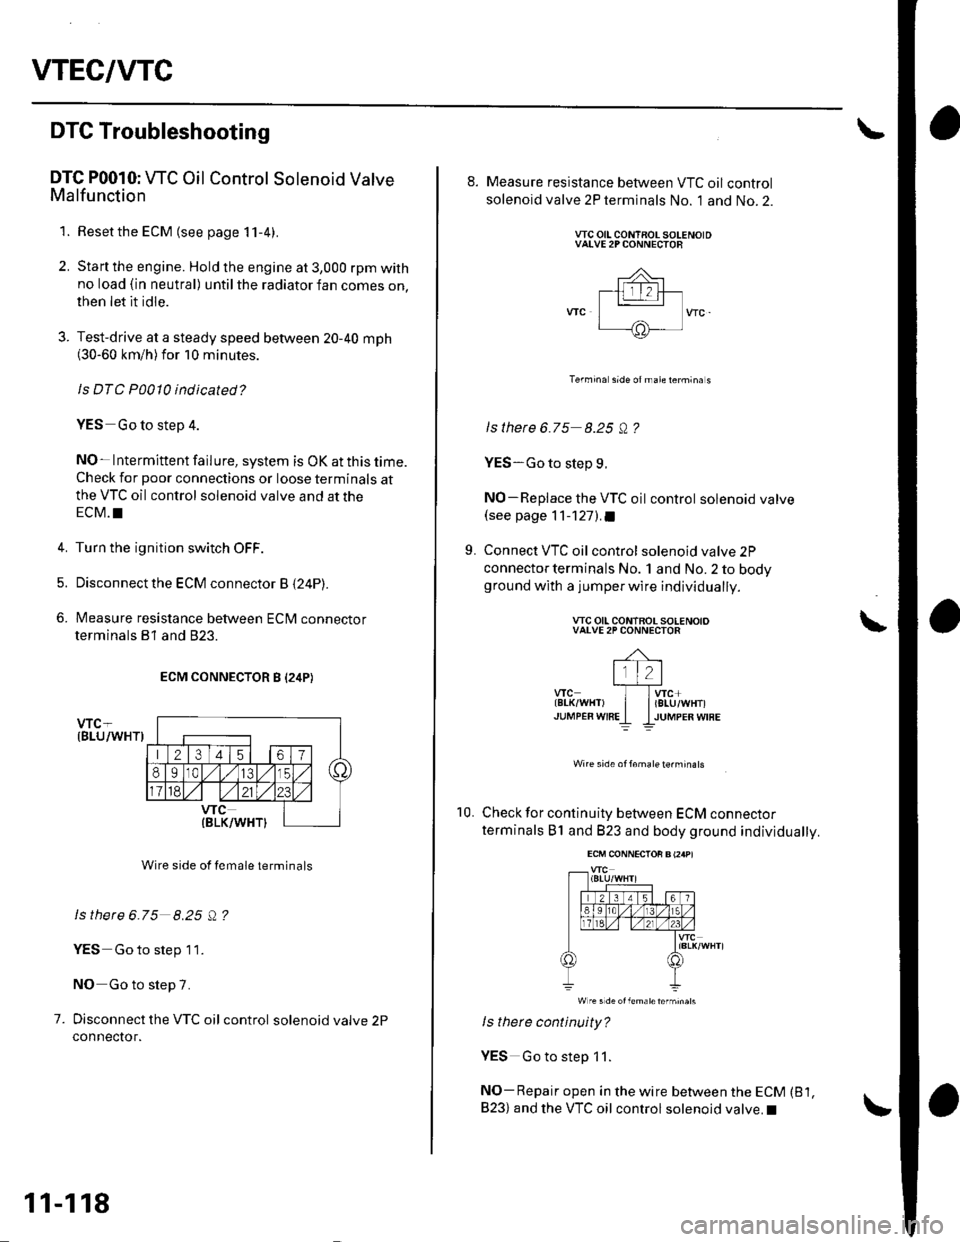 HONDA CIVIC 2003 7.G Workshop Manual VTEC/VTC
DTG Troubleshooting
DTC P0010: WC Oil Control Solenoid ValveMalfunction
1. Resetthe ECM (see page 11-4).
2. Start the engine. Hold the engine at 3,000 rpm withno load (in neutral) until the r